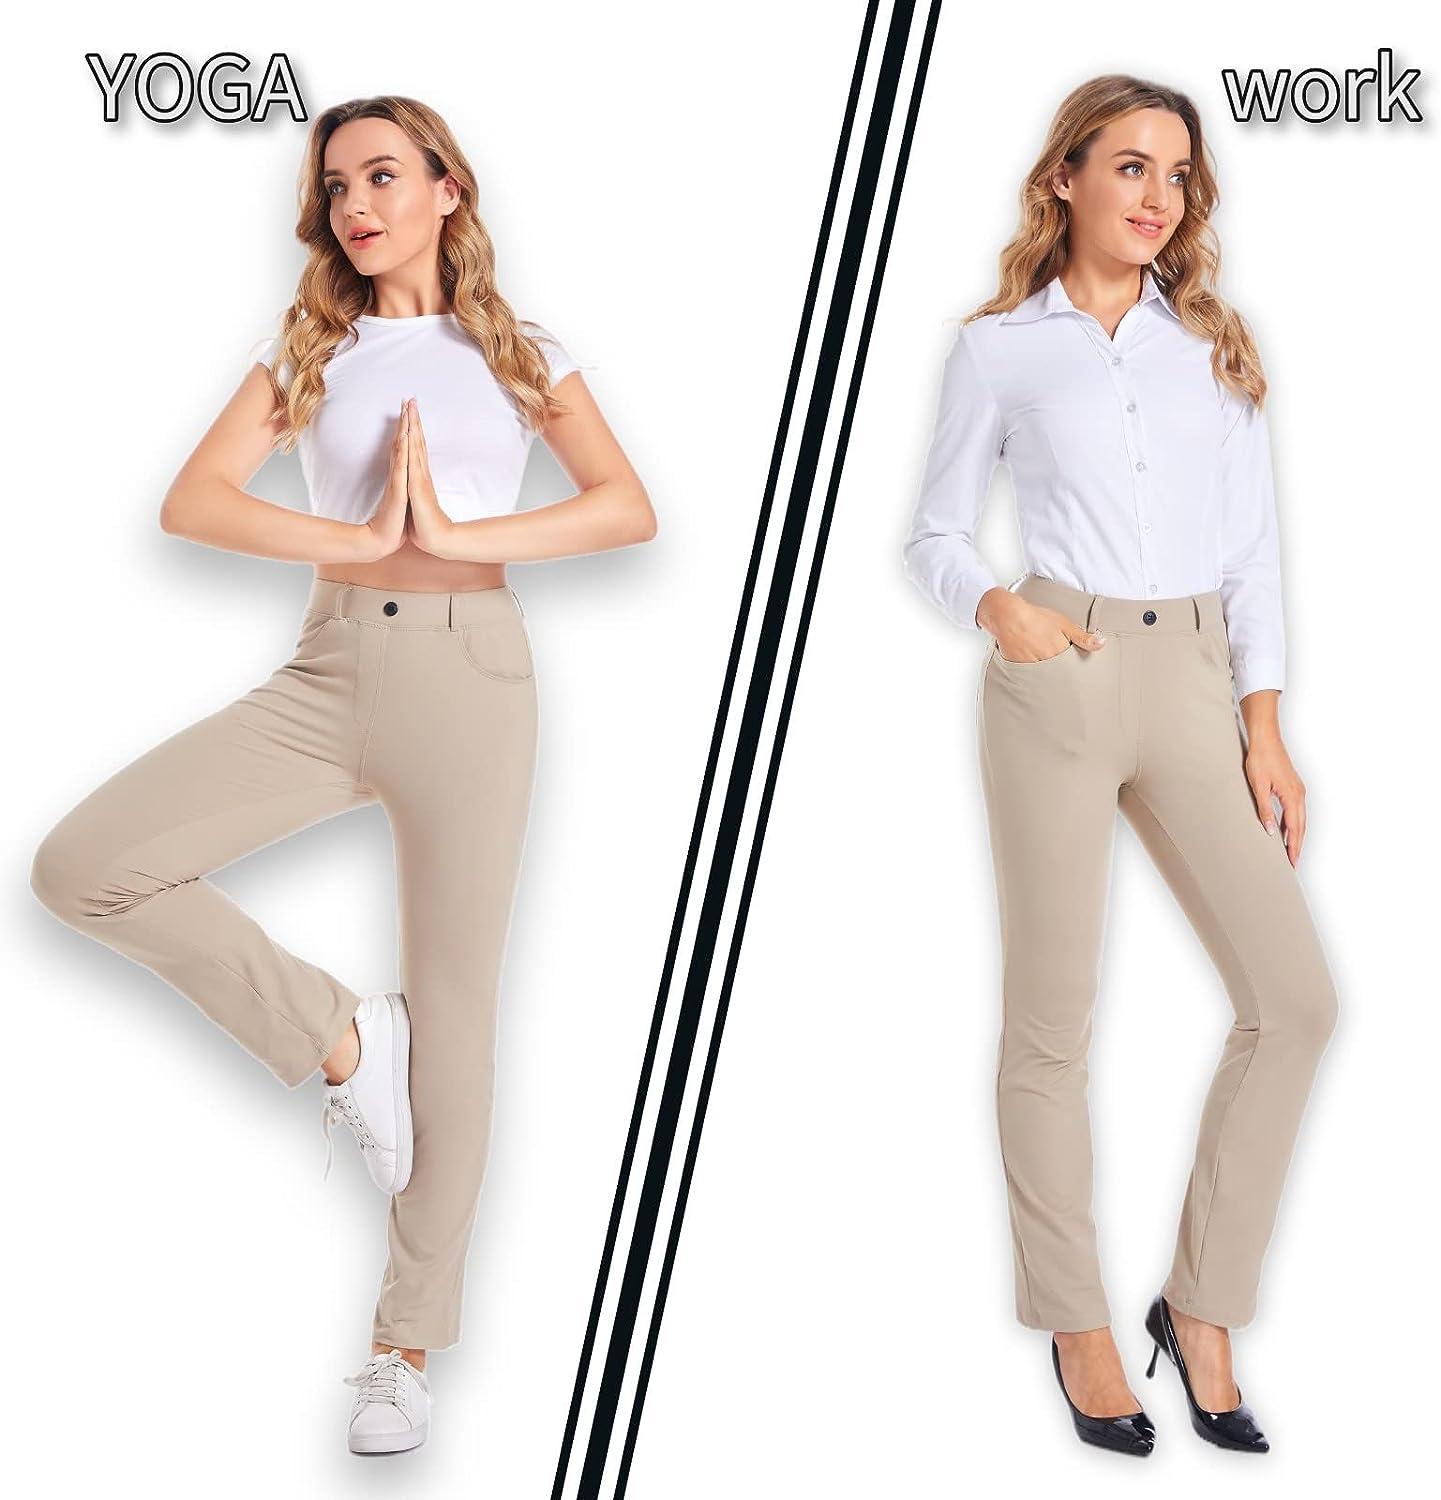 HARTPOR Women's Yoga Dress Pants Stretchy for Work Office Slacks for Business  Casual Pants Petite/Regular with Pockets 31 Inseam X-Large Khaki